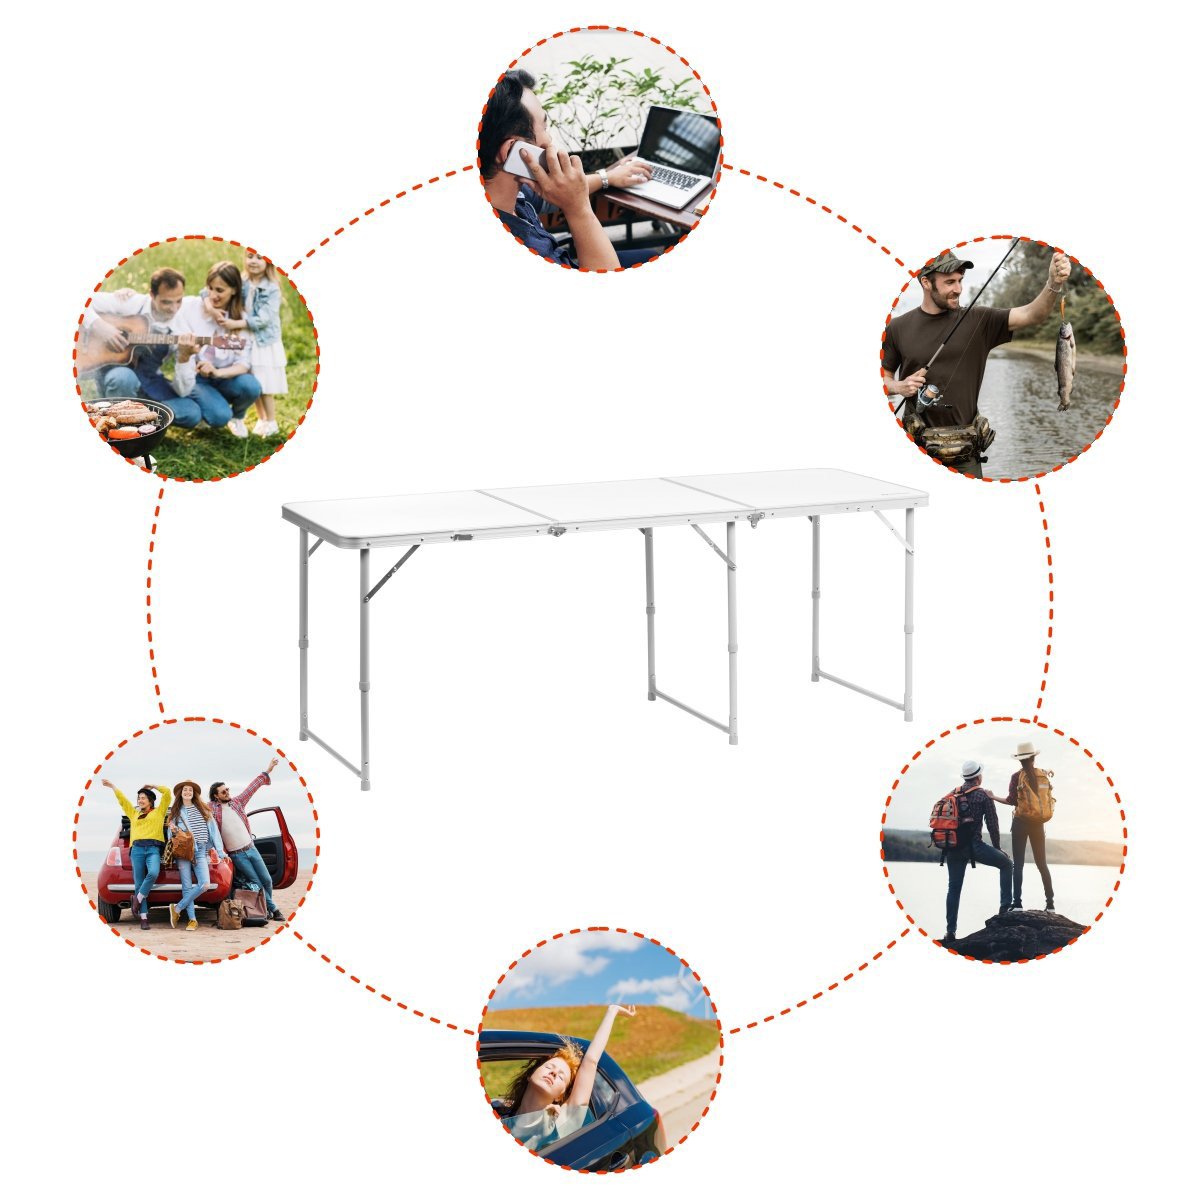 Large Three-Section Aluminum Folding Camping Table could be used in a plenty of activities